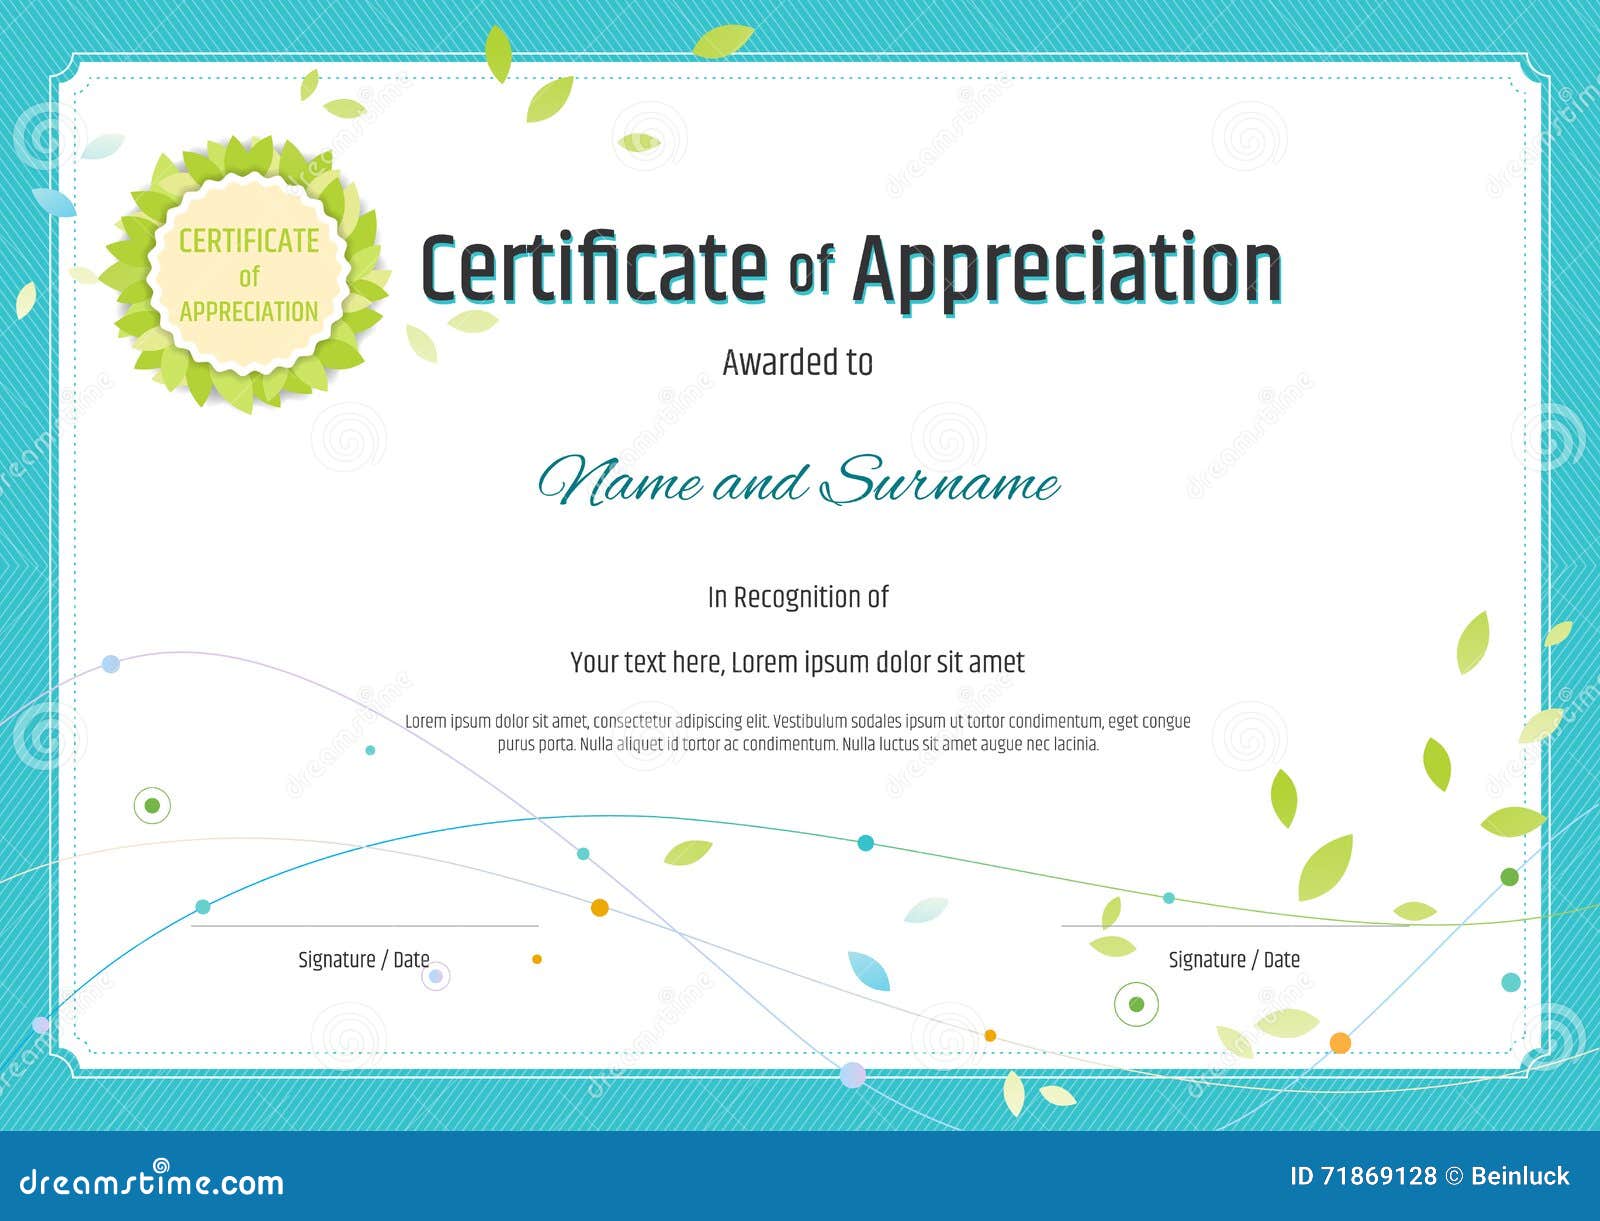 Certificate of Appreciation Template in Nature Theme with Green Intended For Template For Recognition Certificate